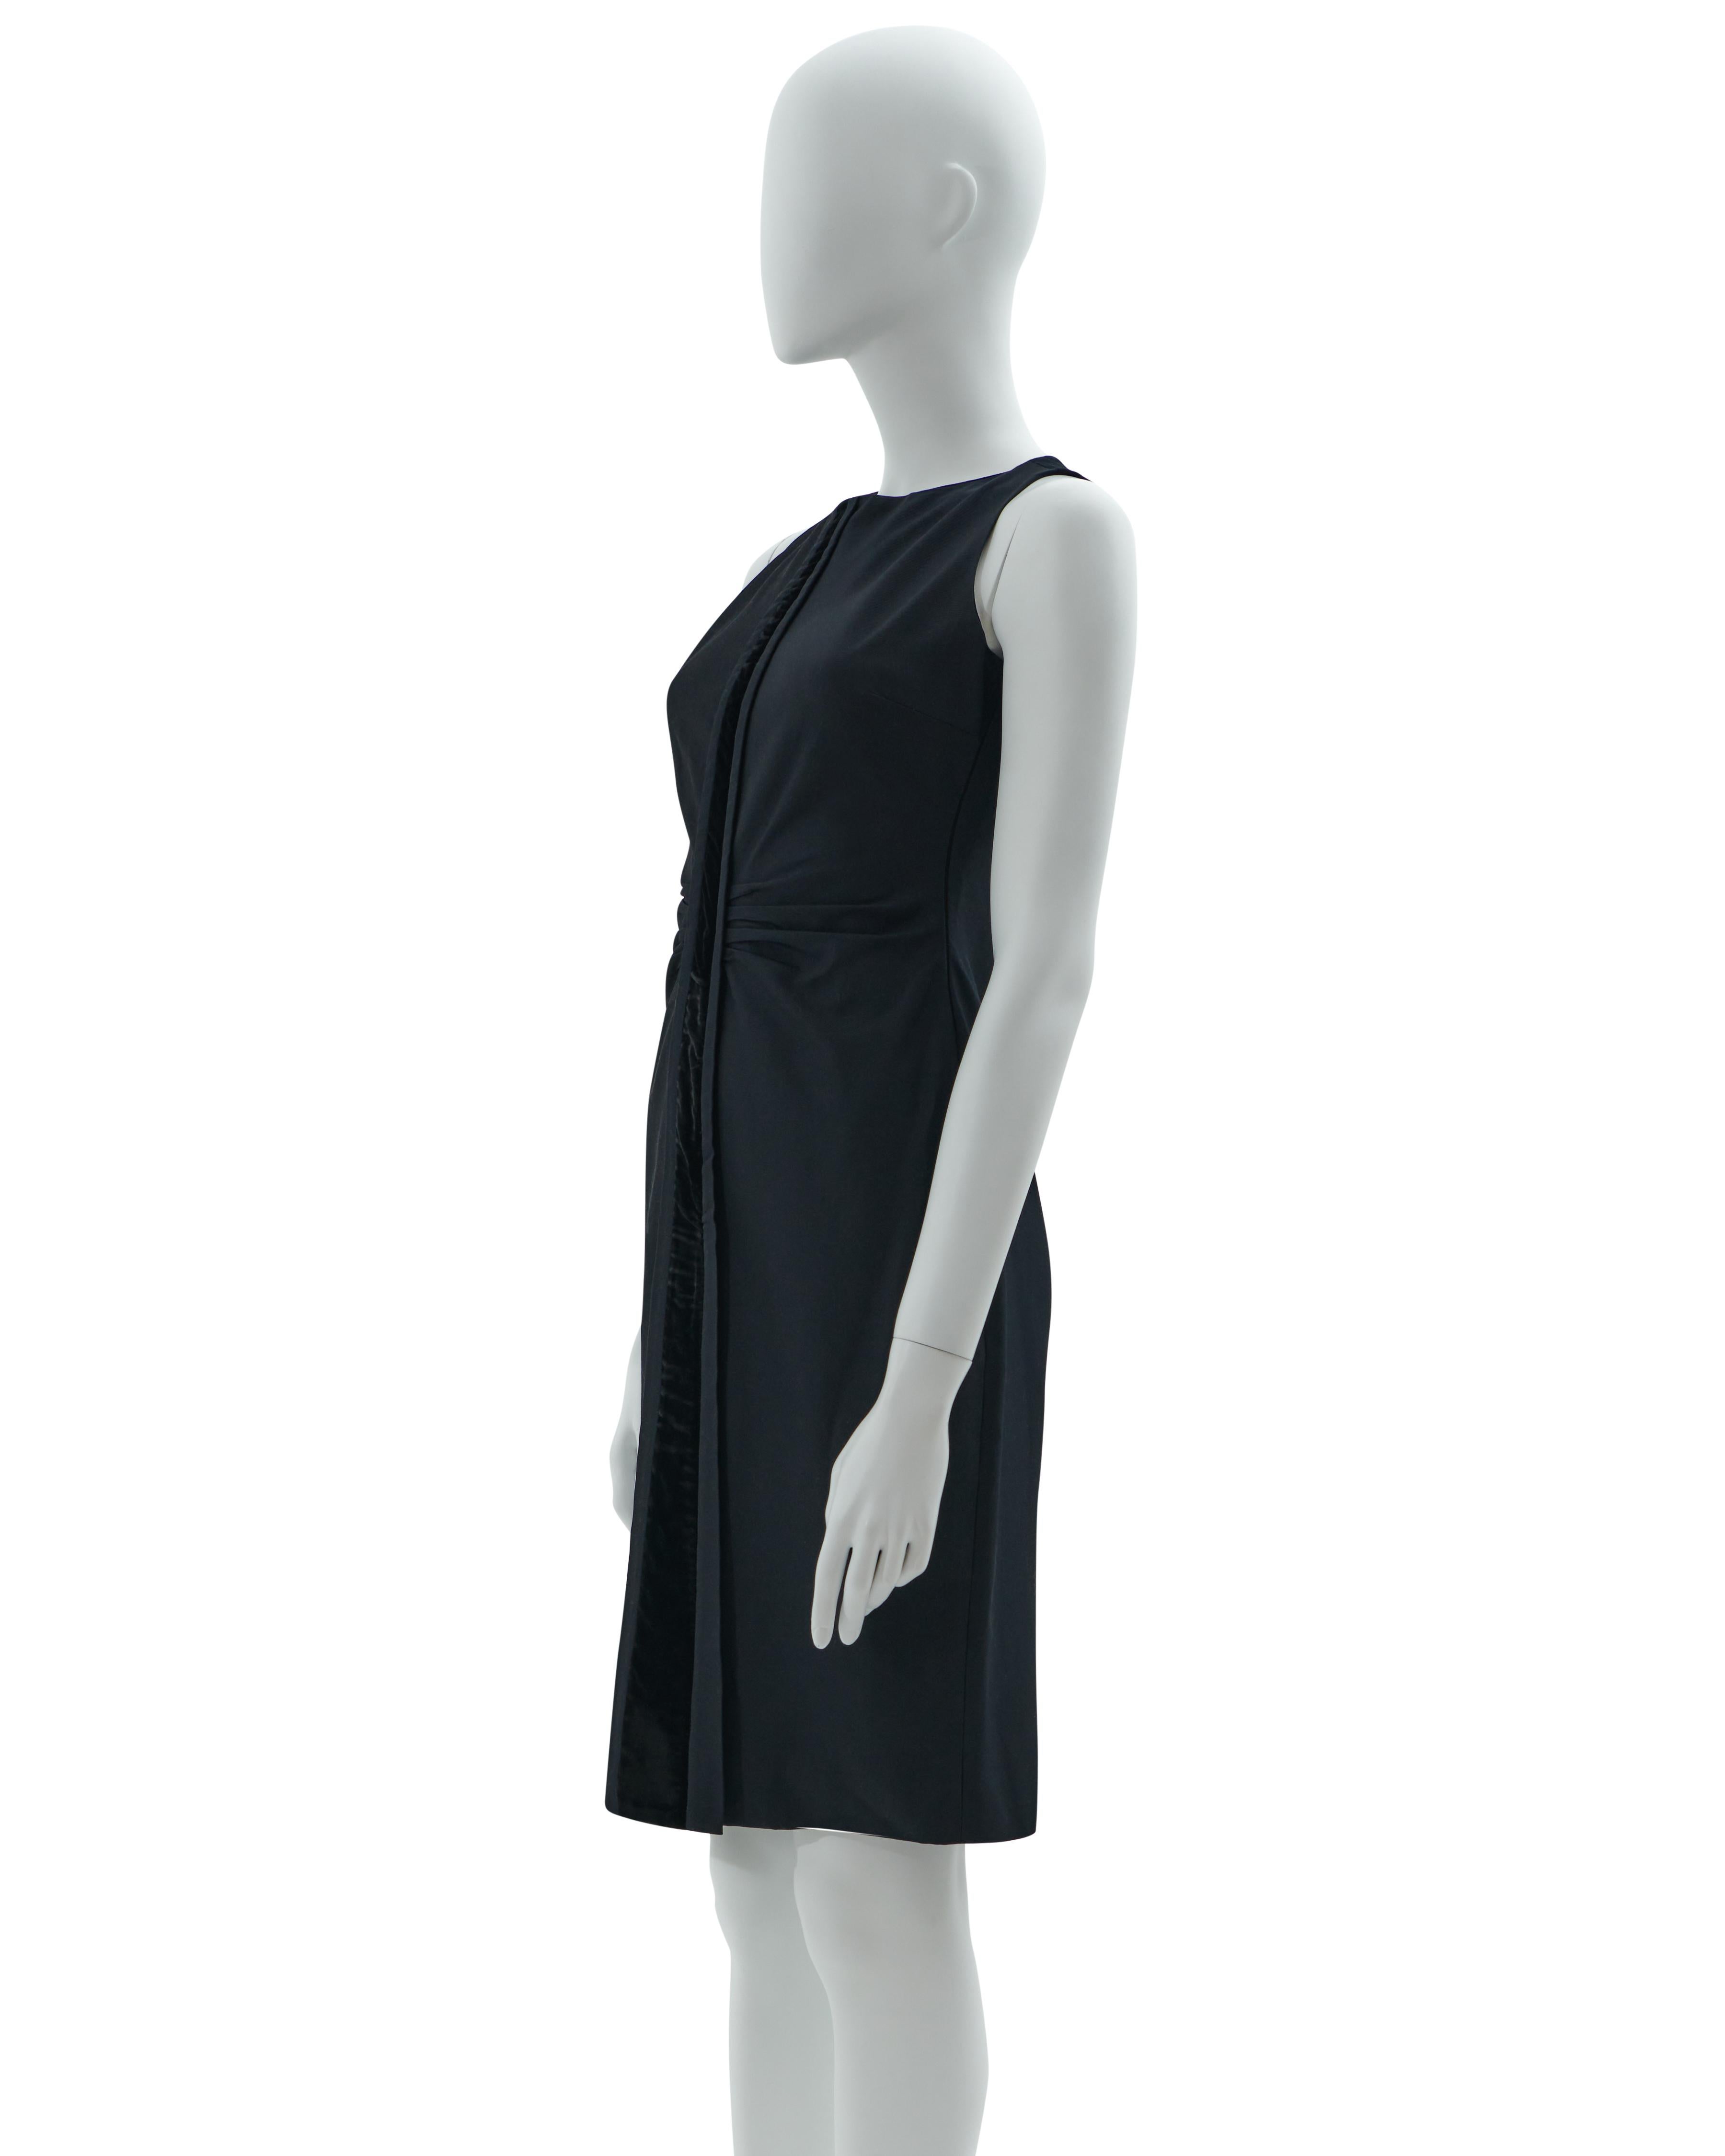 - Designed by Tom Ford 
- Sold by SKof.Archive
- Fall-Winter 2004/05
- Black sheath dress 
- Bateau neckline 
- Sleveless 
- Front box pleat detail at waist 
- Center front and back velvet panel and two front and back vents
- Side seam zipper with